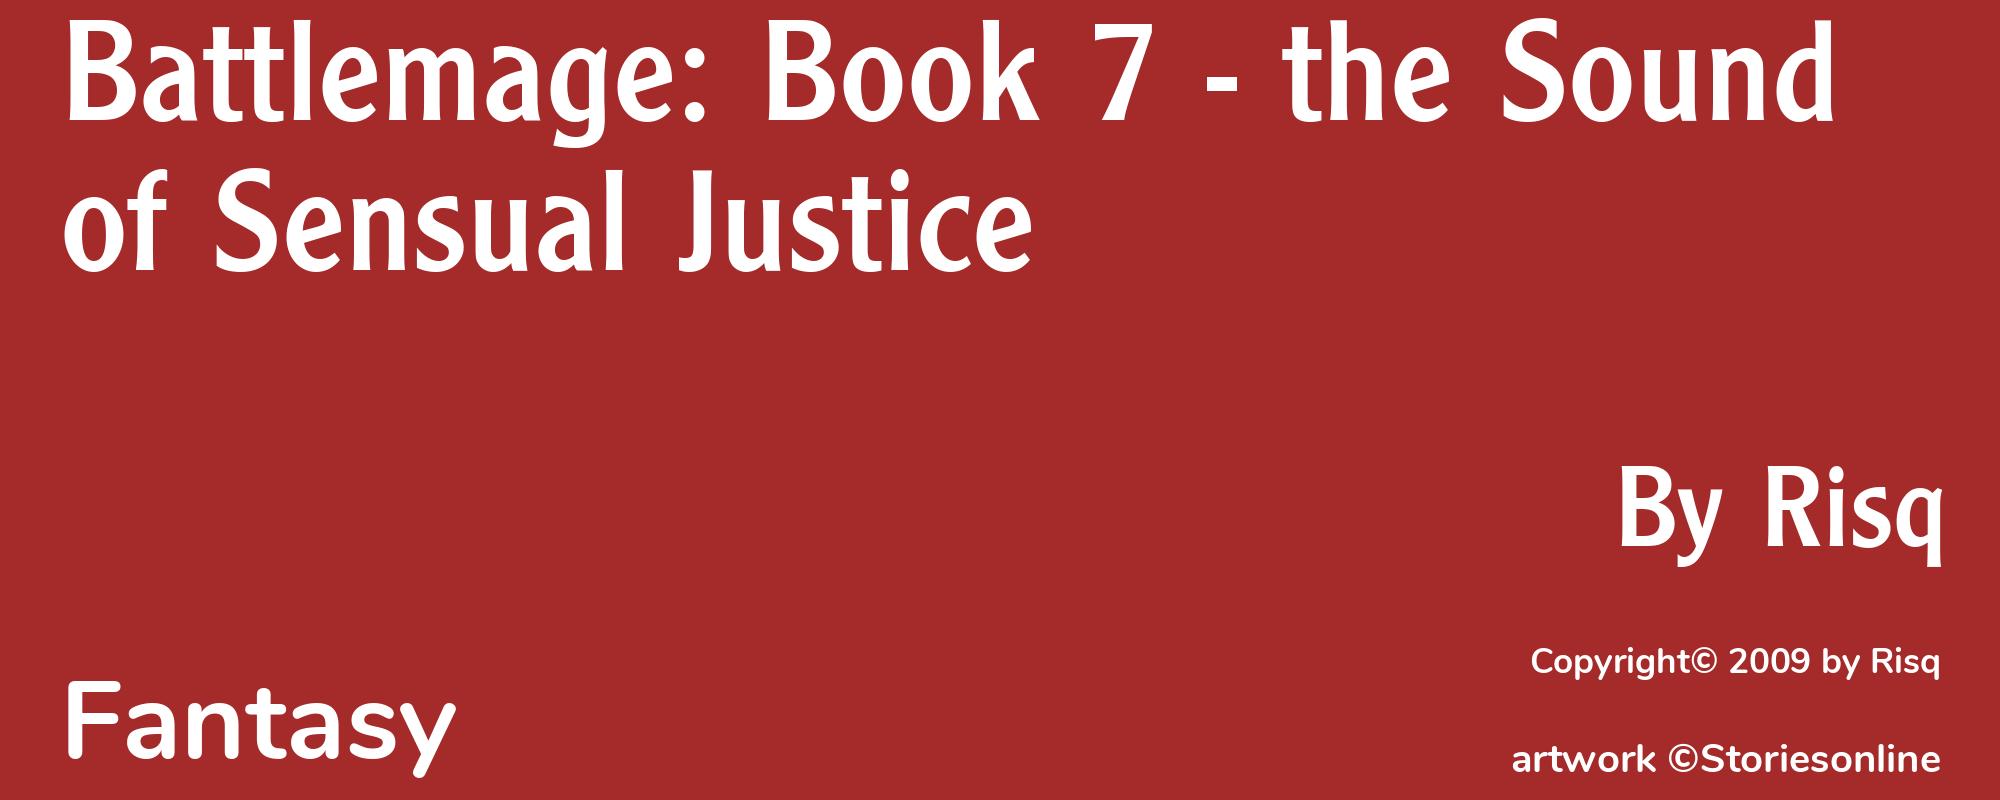 Battlemage: Book 7 - the Sound of Sensual Justice - Cover